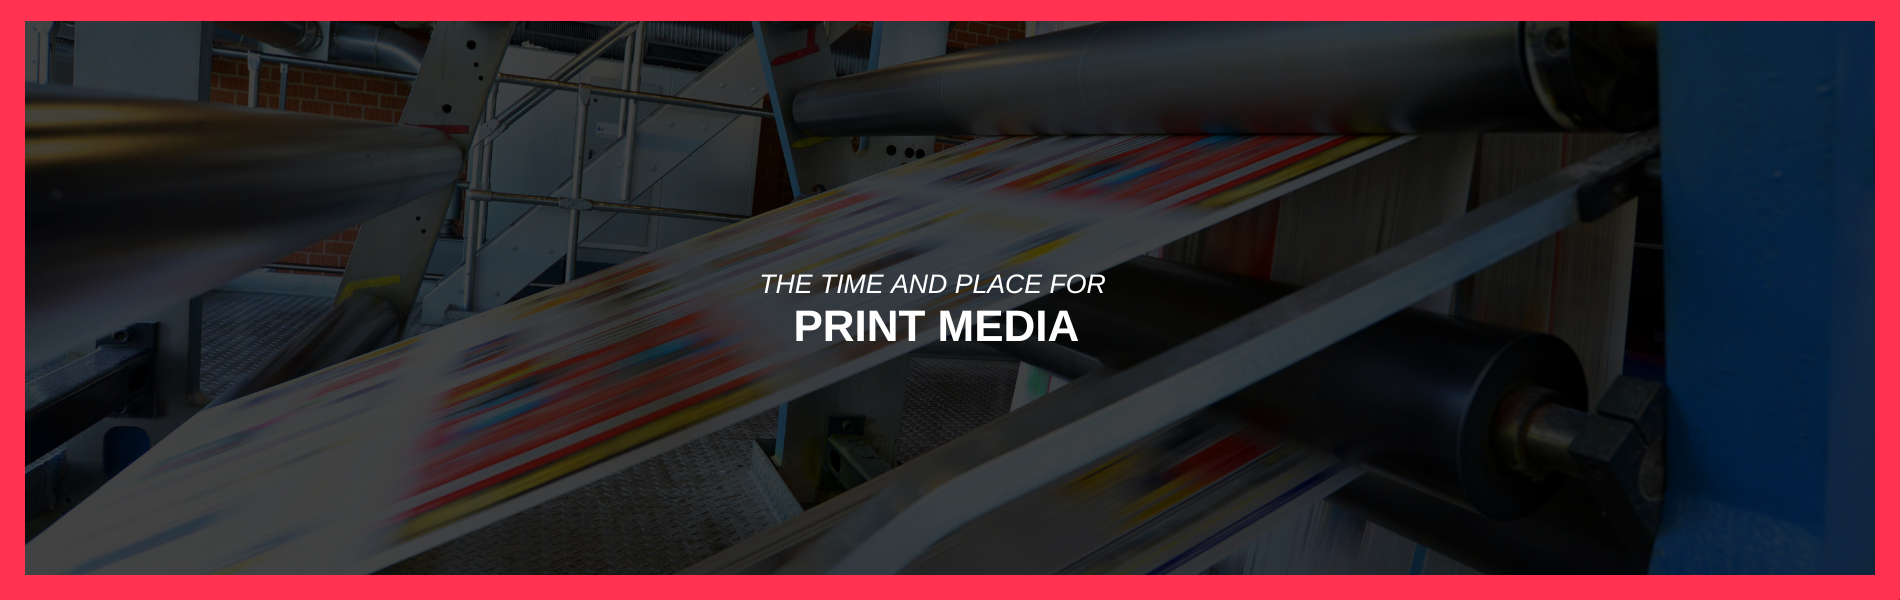 The Time and Place for Print Media